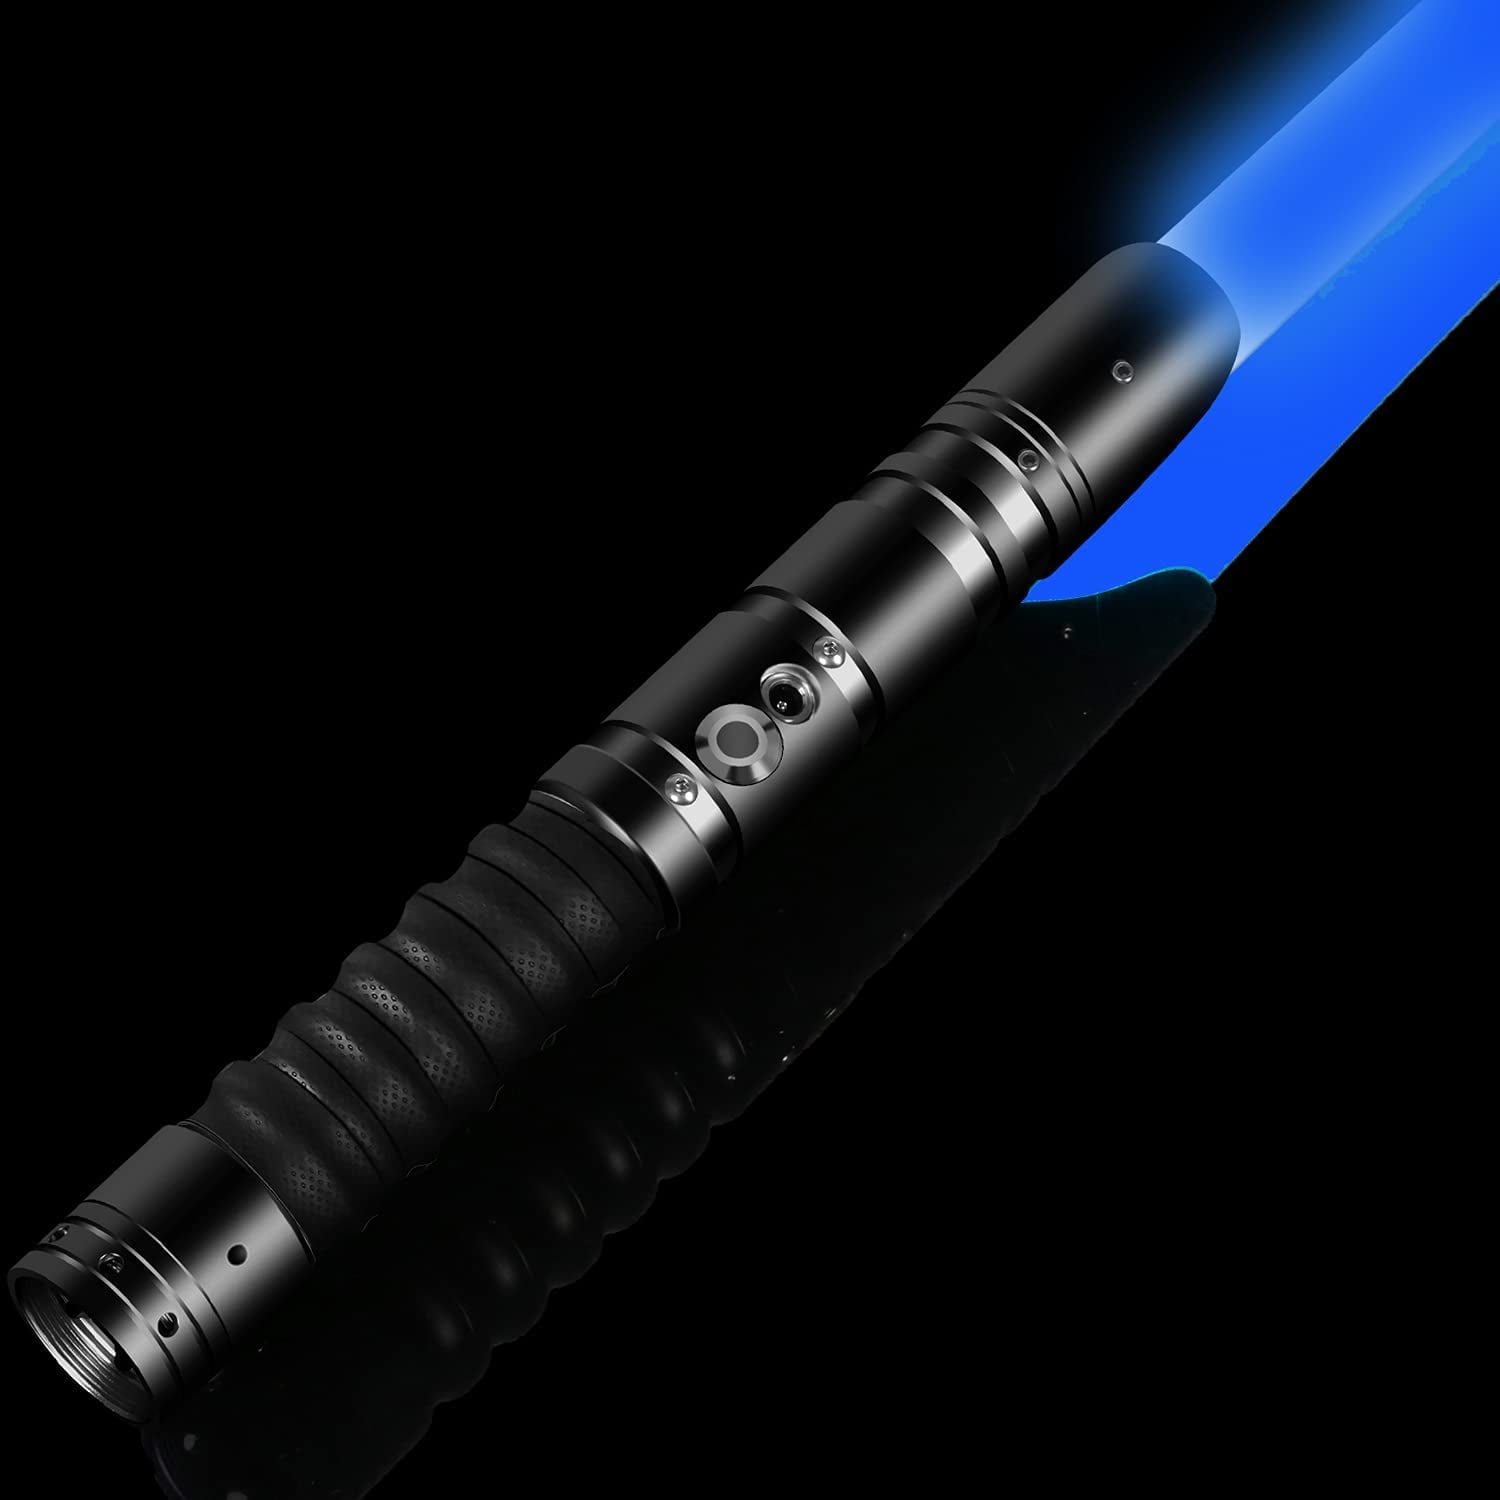 CVCBSER Flash Smooth Swing FX Dueling Lightsaber with12 Colors and 9 Kinds Mode Sounds Changeable Premium Aluminium Alloy Handle Light Saber Toys 